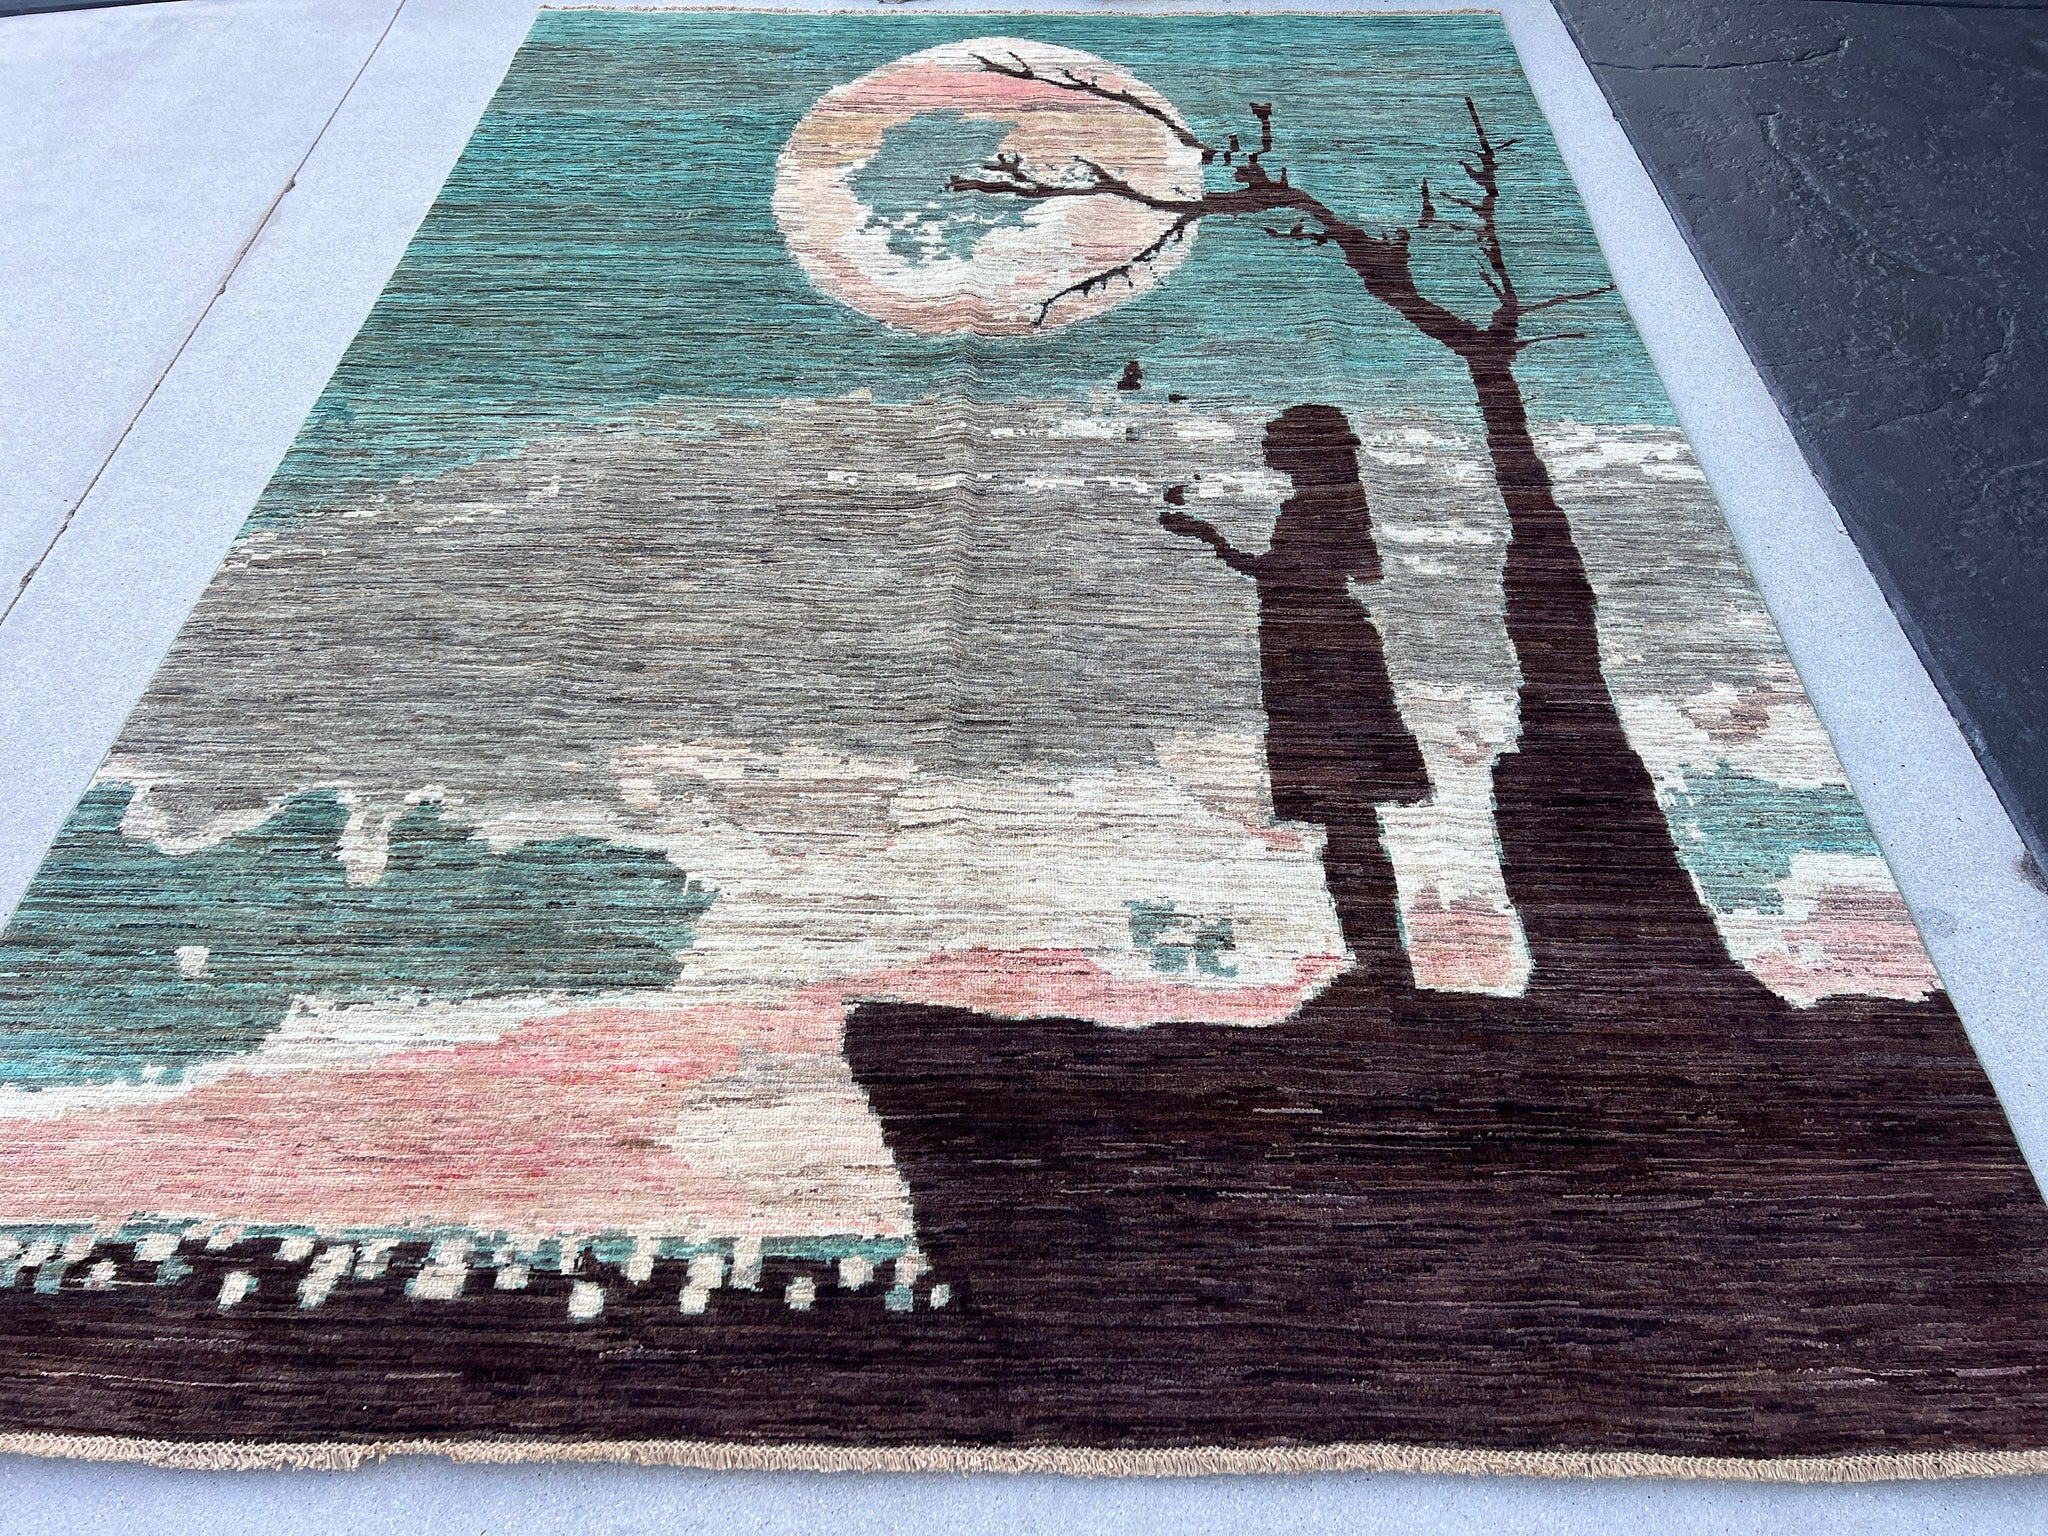 7x10 (215x305) Handmade Afghan Rug | Teal Turquoise Grey Brown Beige Salmon Pink Coral | Pictorial Figurative Scenic Story Narrative Themed